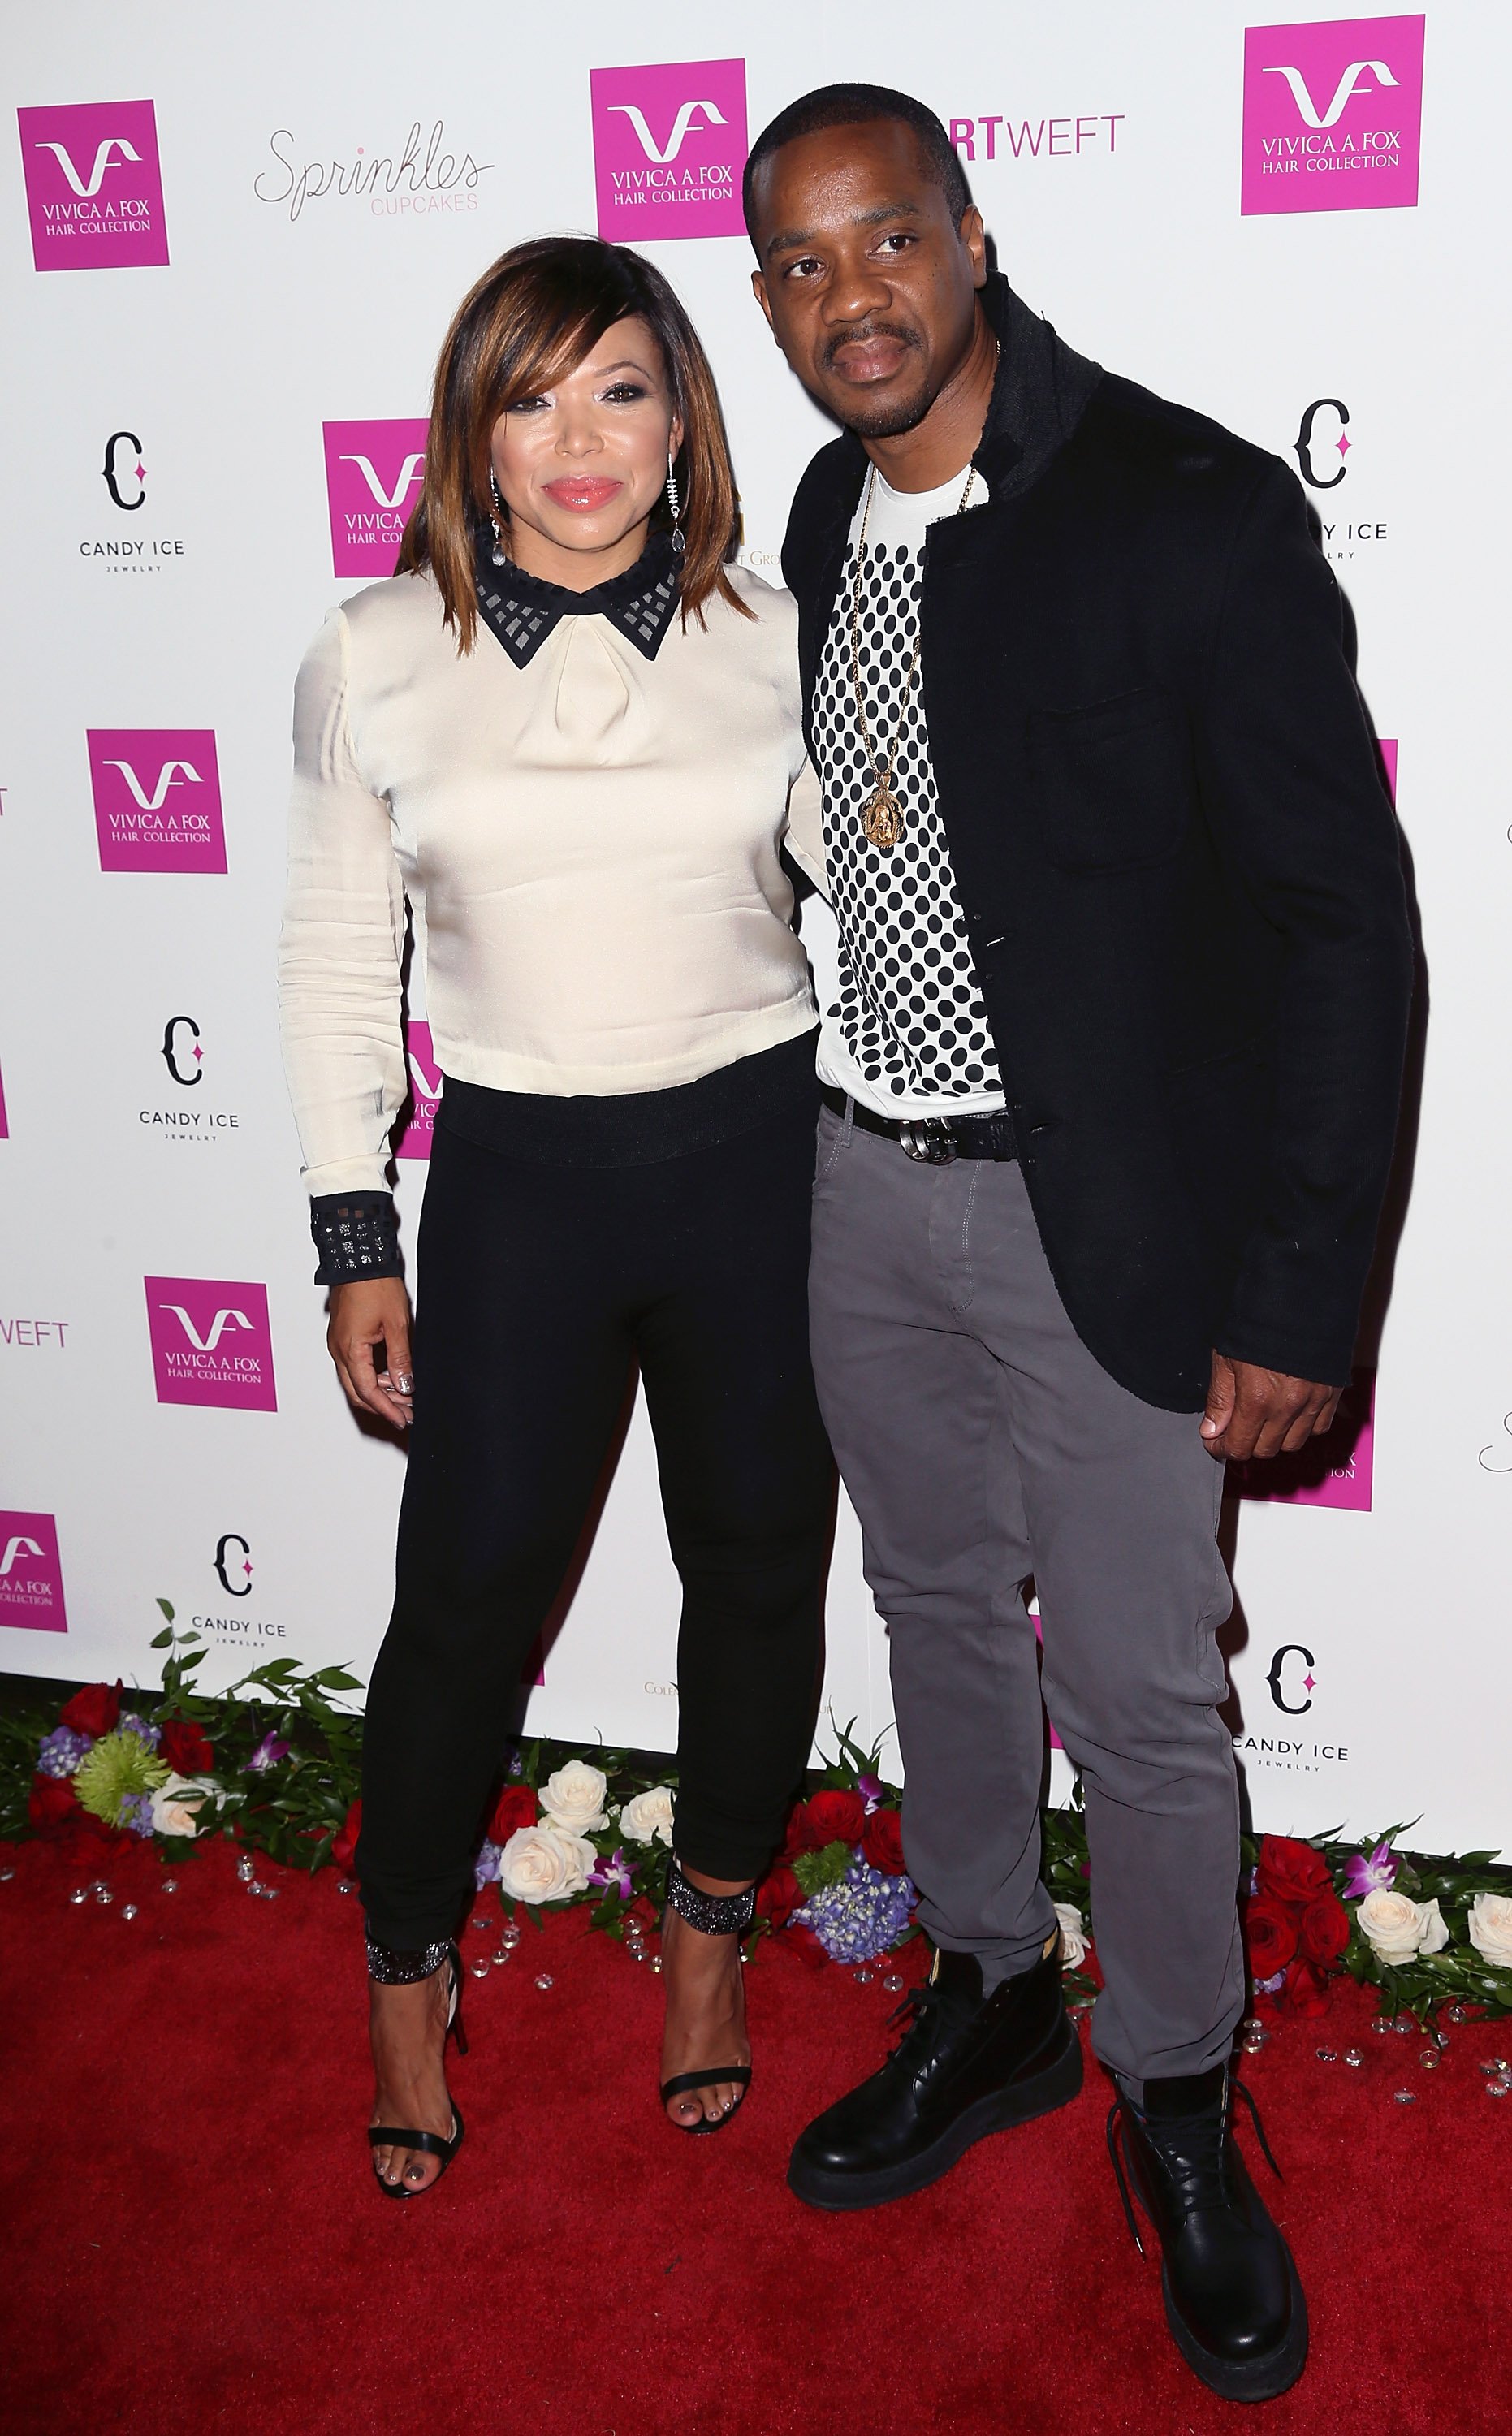 Tisha Campbell-Martin and Duane Martin attending Vivica A. Fox's 50th birthday in August 2014. | Photo: Getty Images